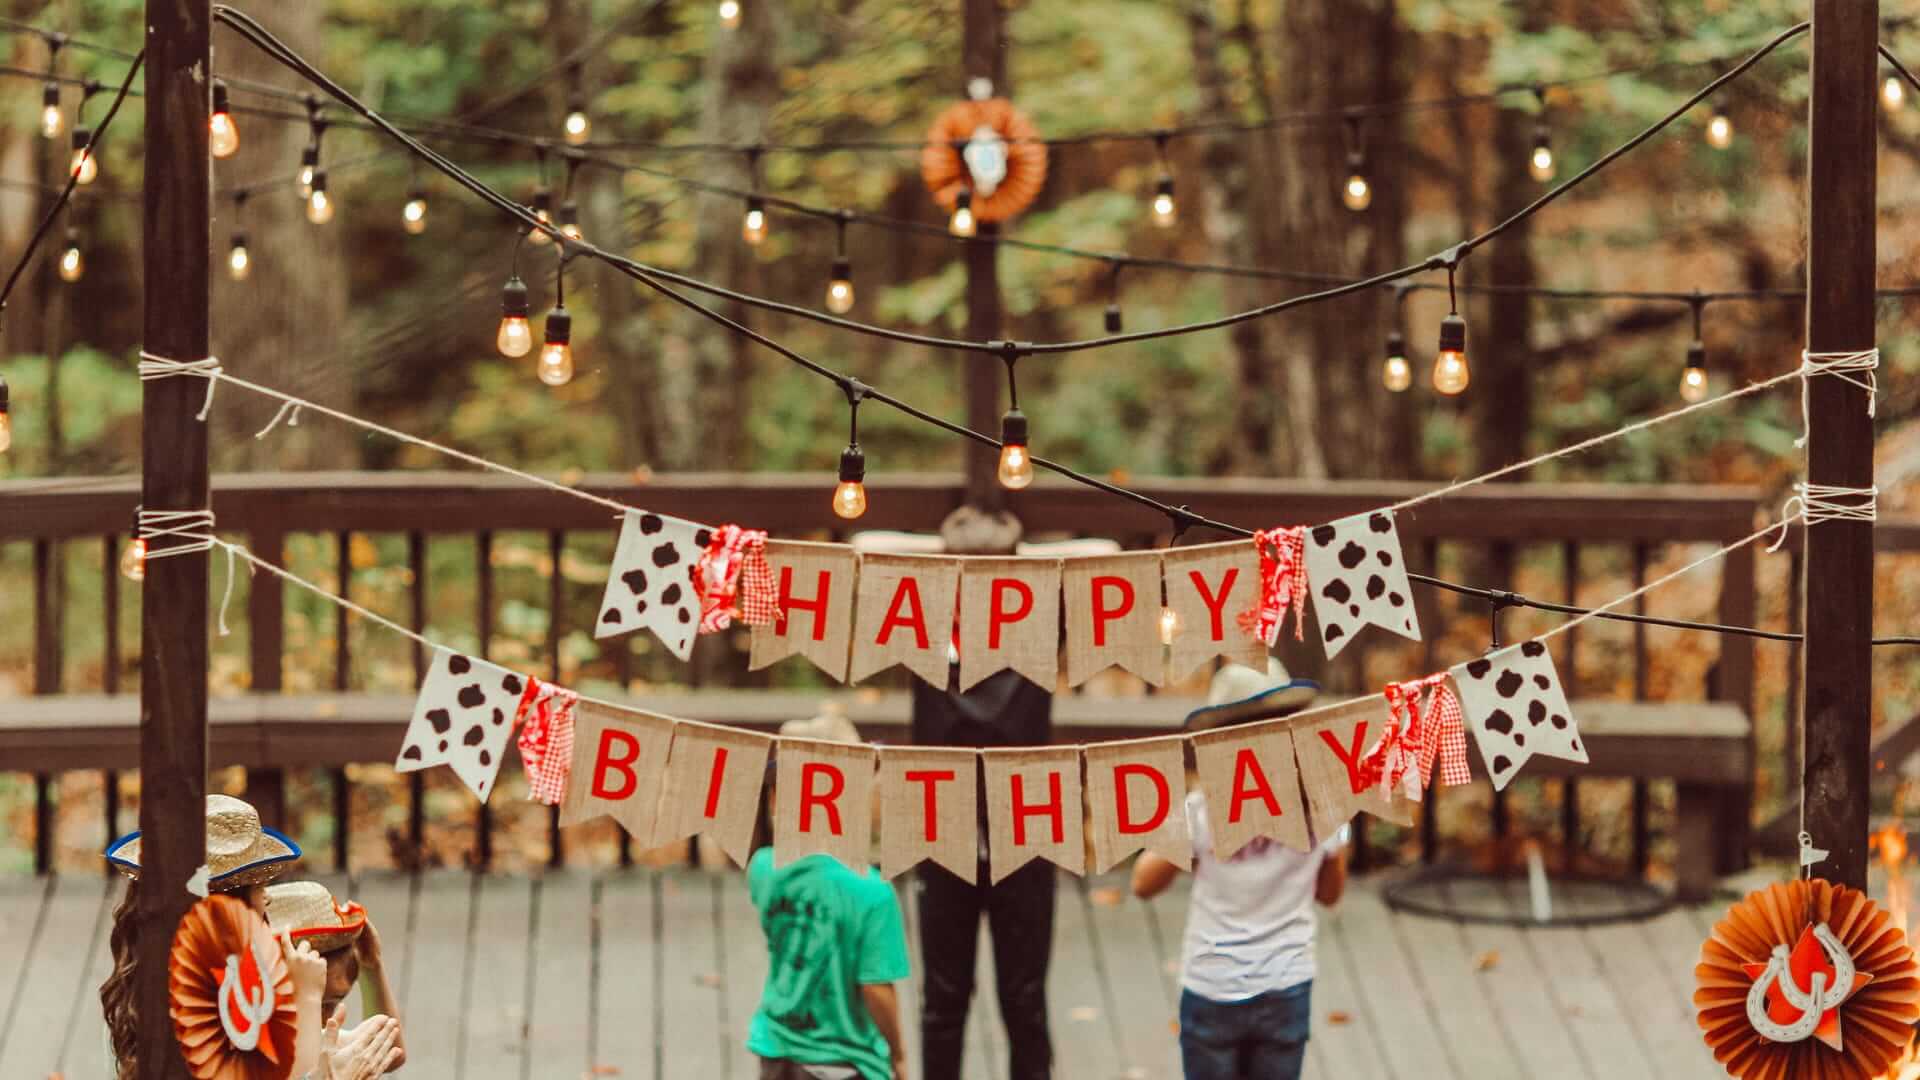 How To Plan A Birthday Party For Adults Step-By-Step